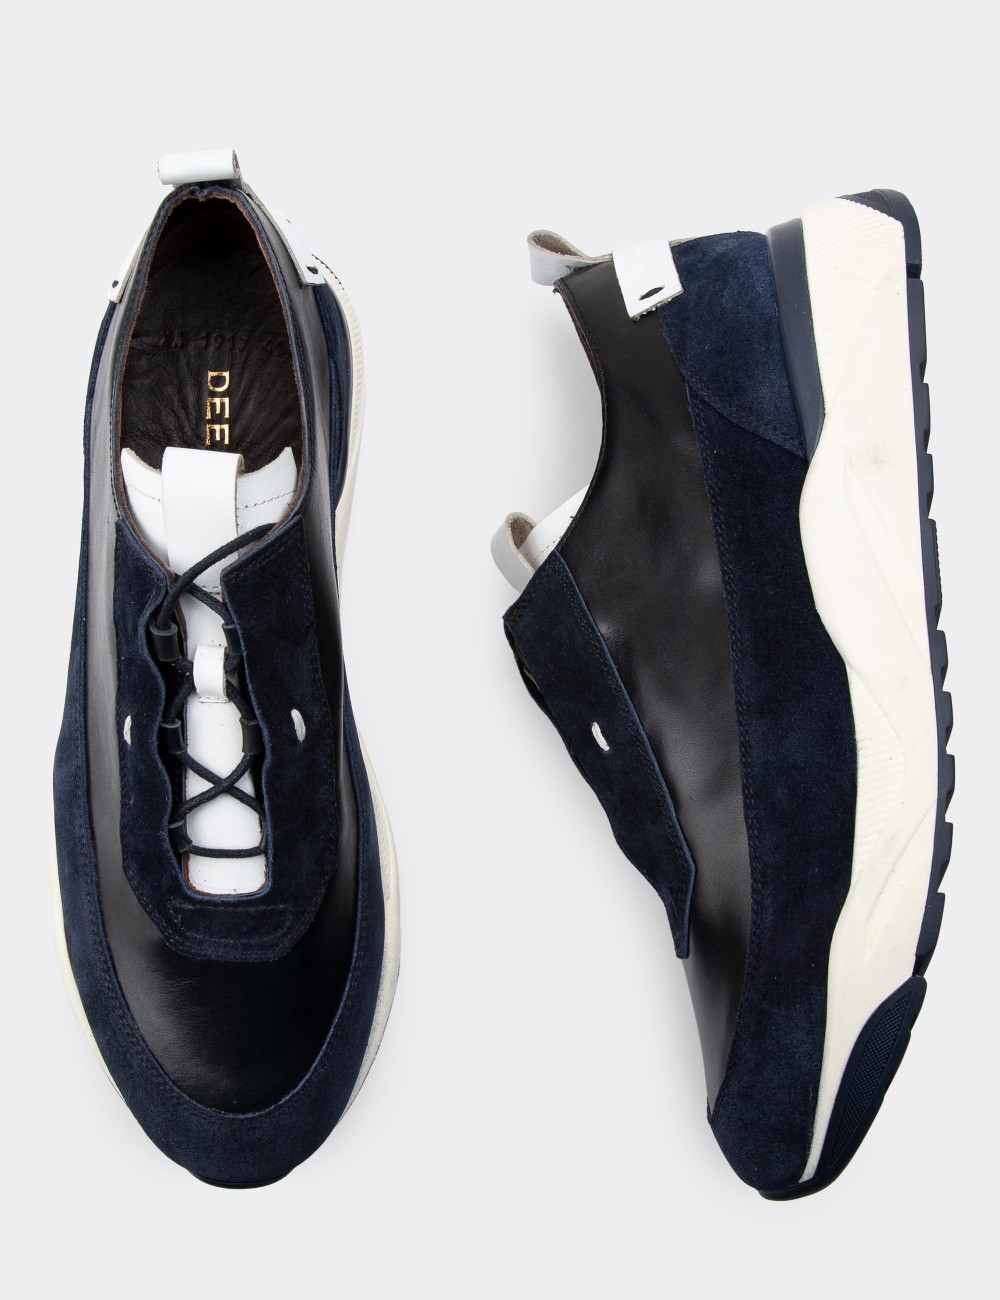 Navy Suede Leather Sneakers - 01917MLCVE01